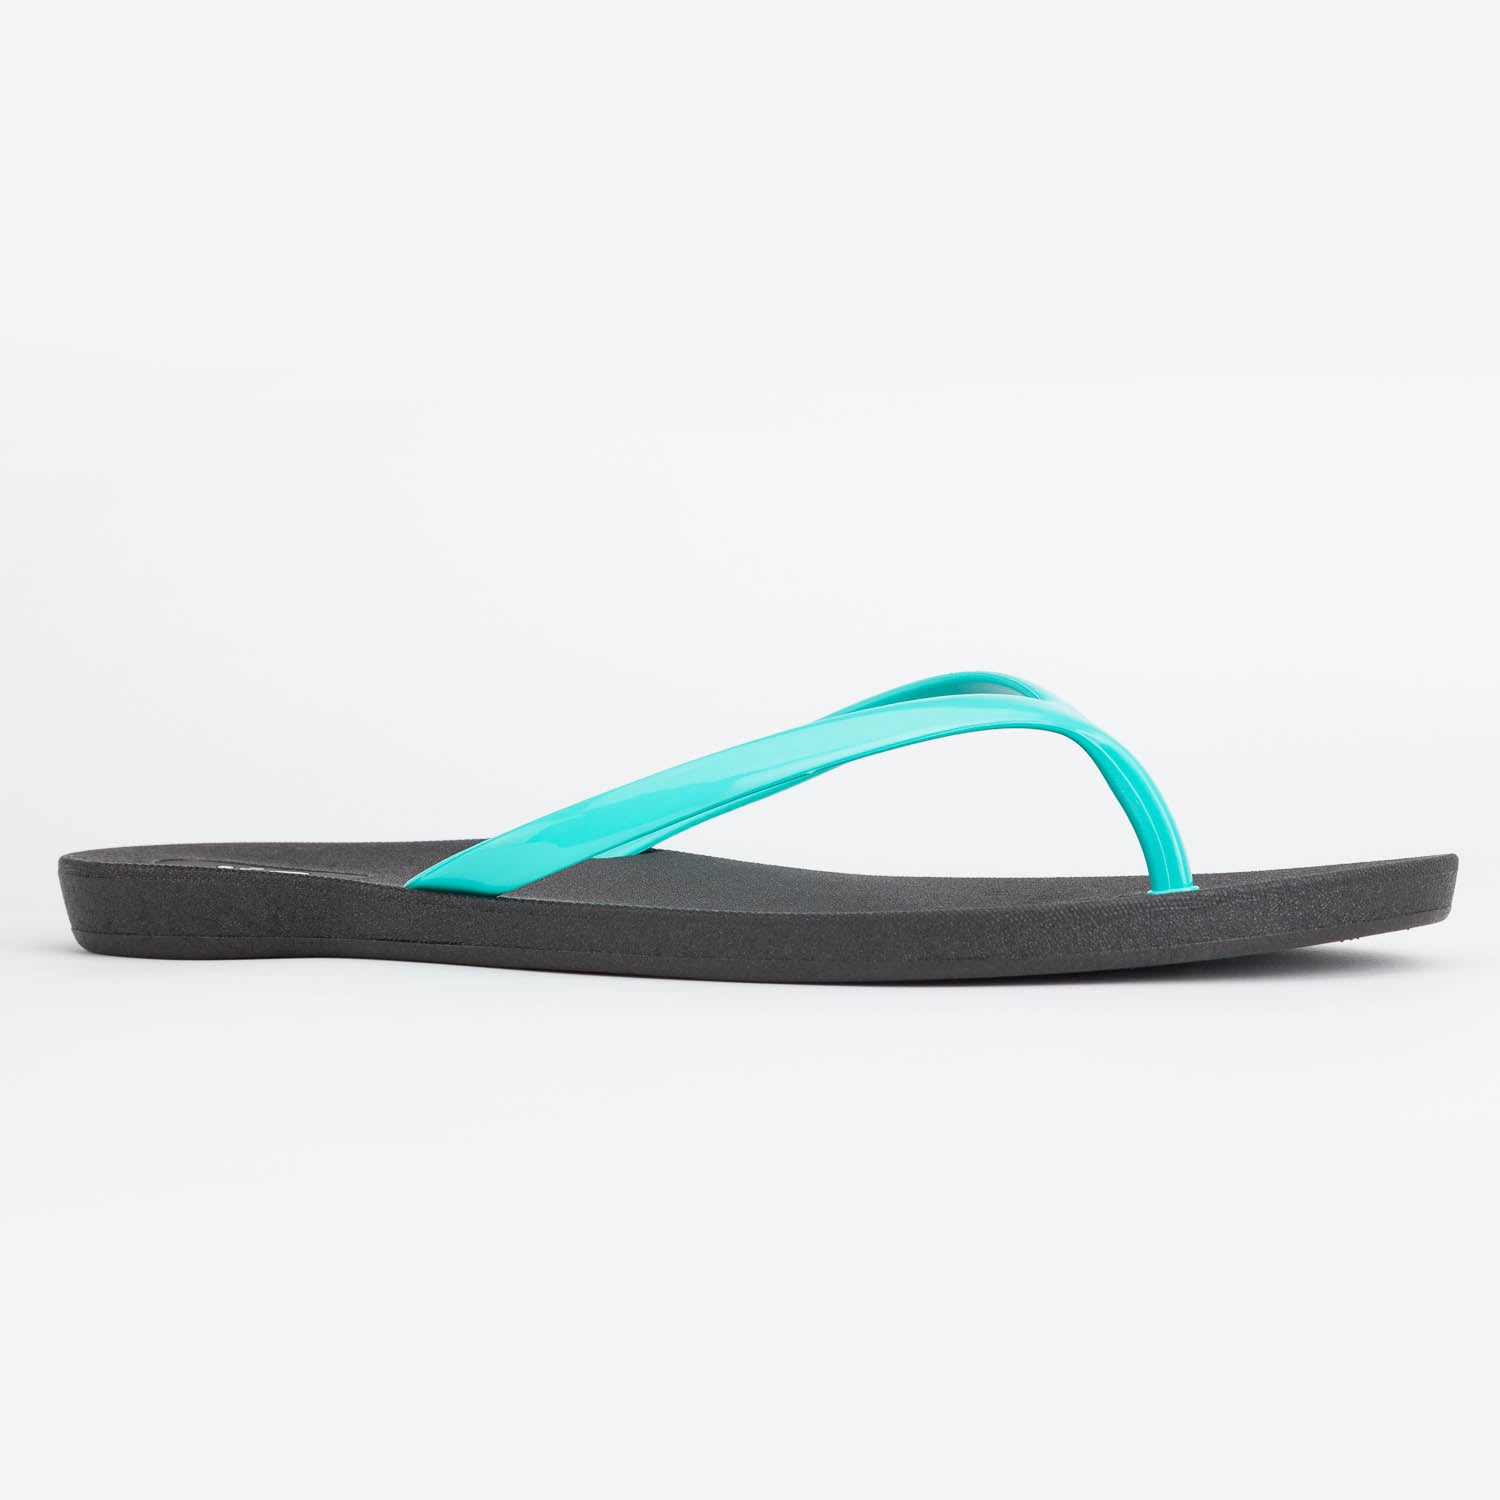 Third Oak, Scout Black Turquoise Recycled Flip Flops